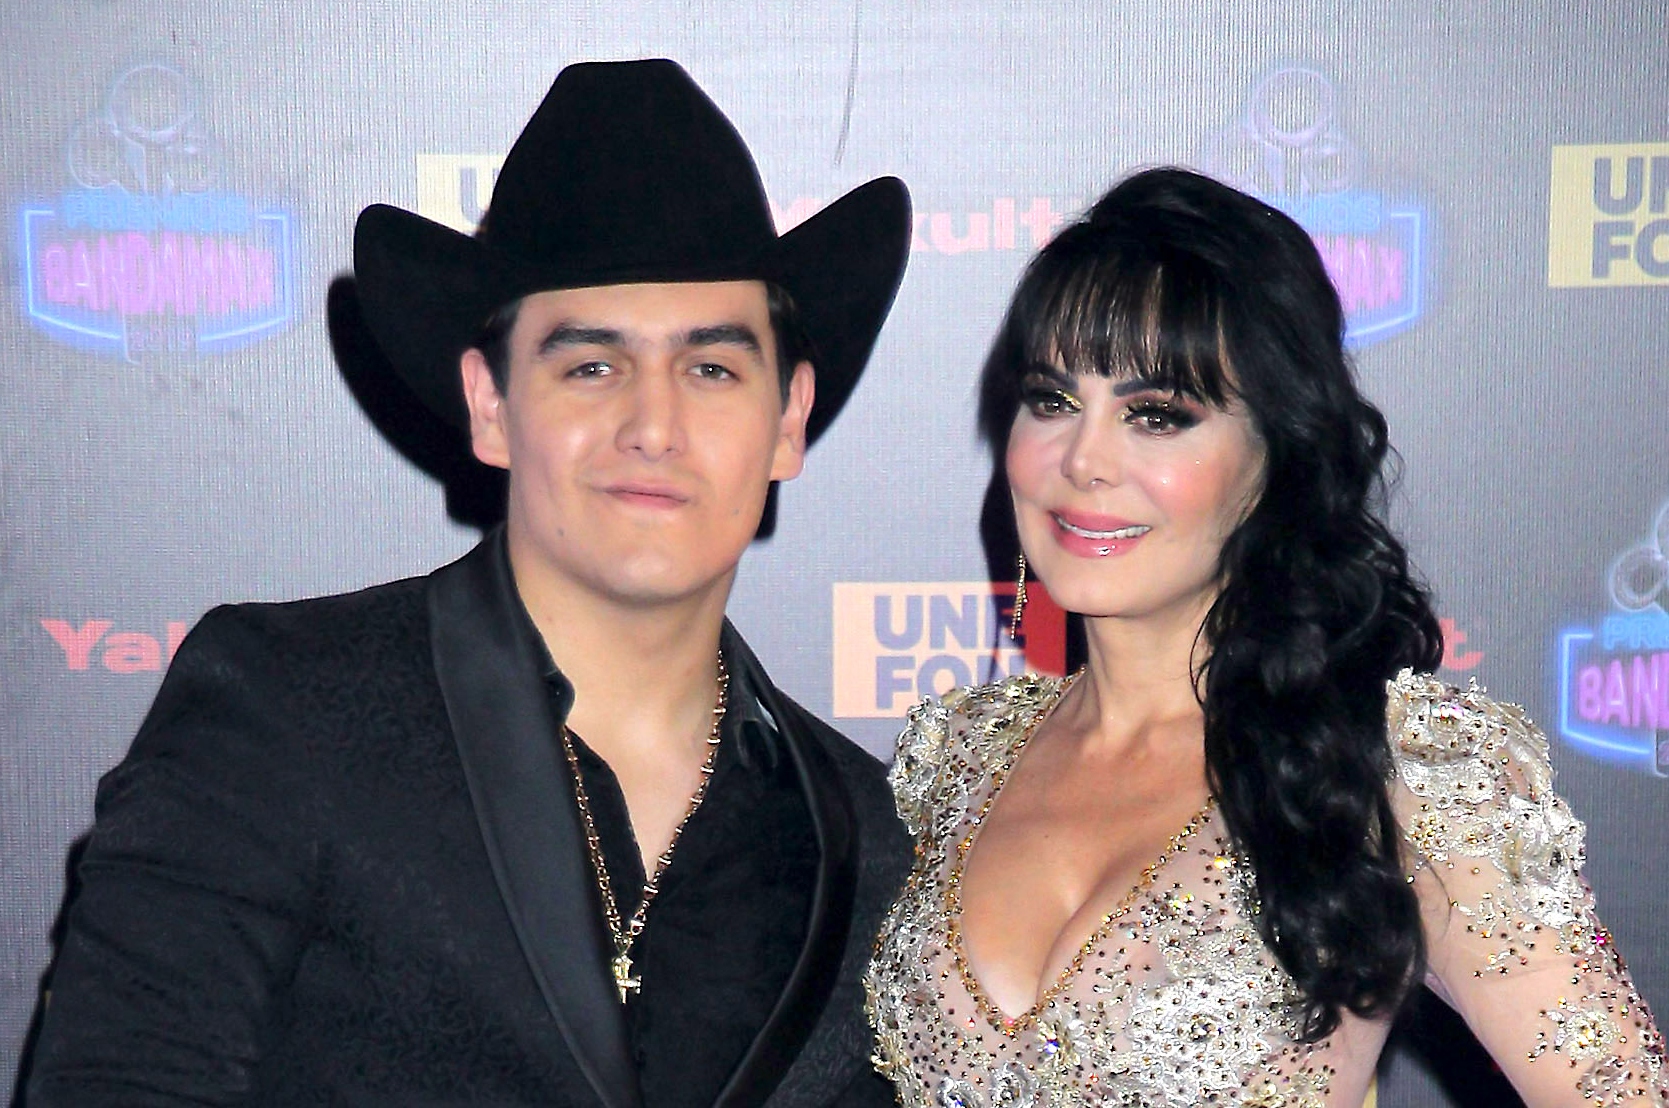 maribel-guardia-receives-tremendous-scolding-for-having-her-son's-ashes-in-her-house